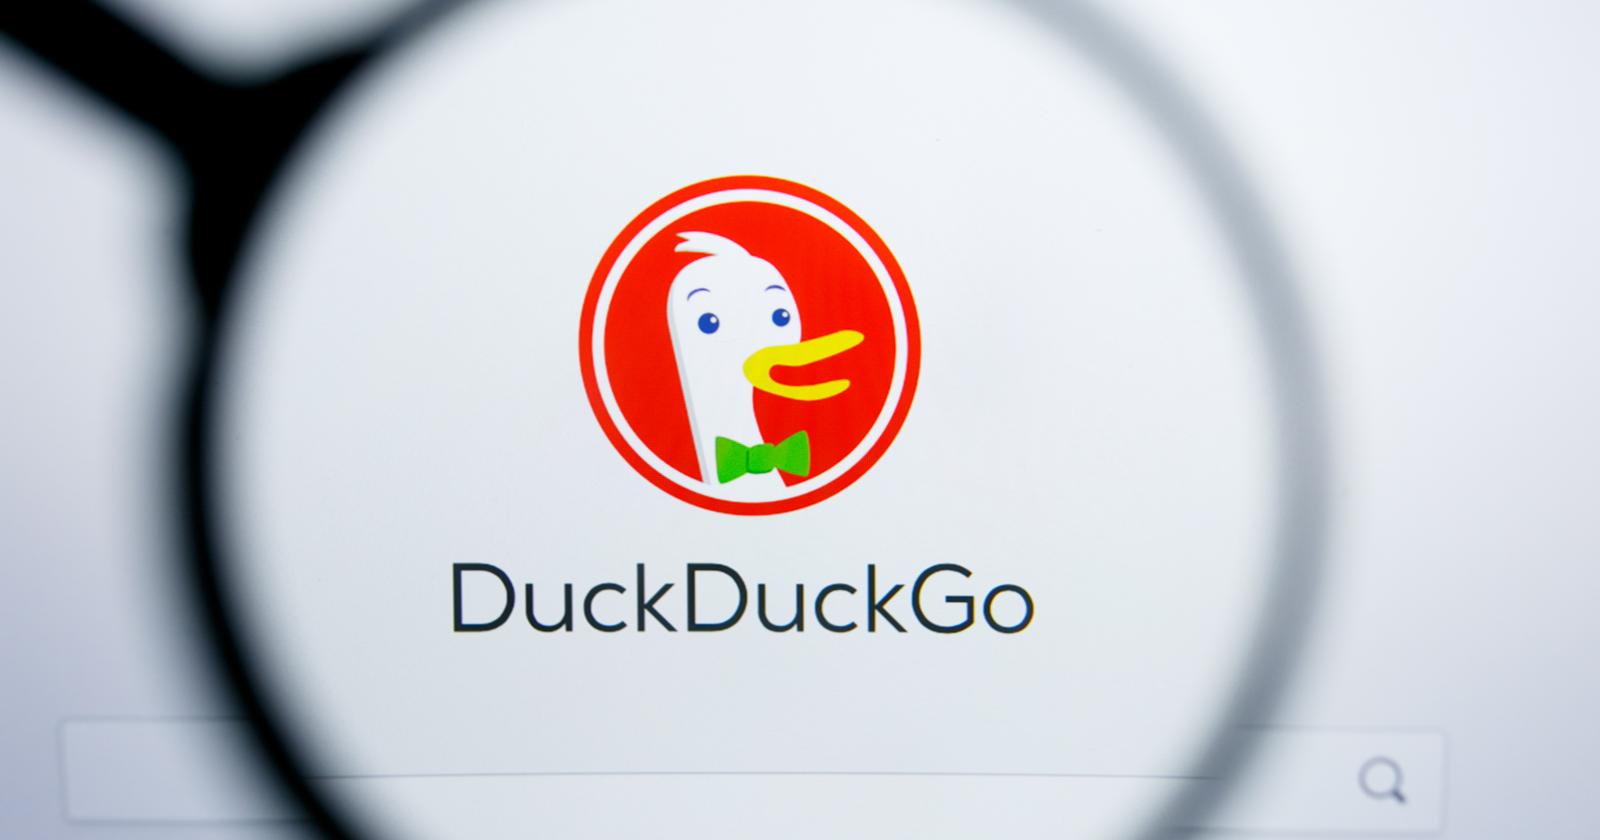 Duckduckgo Seo: What You Should Know